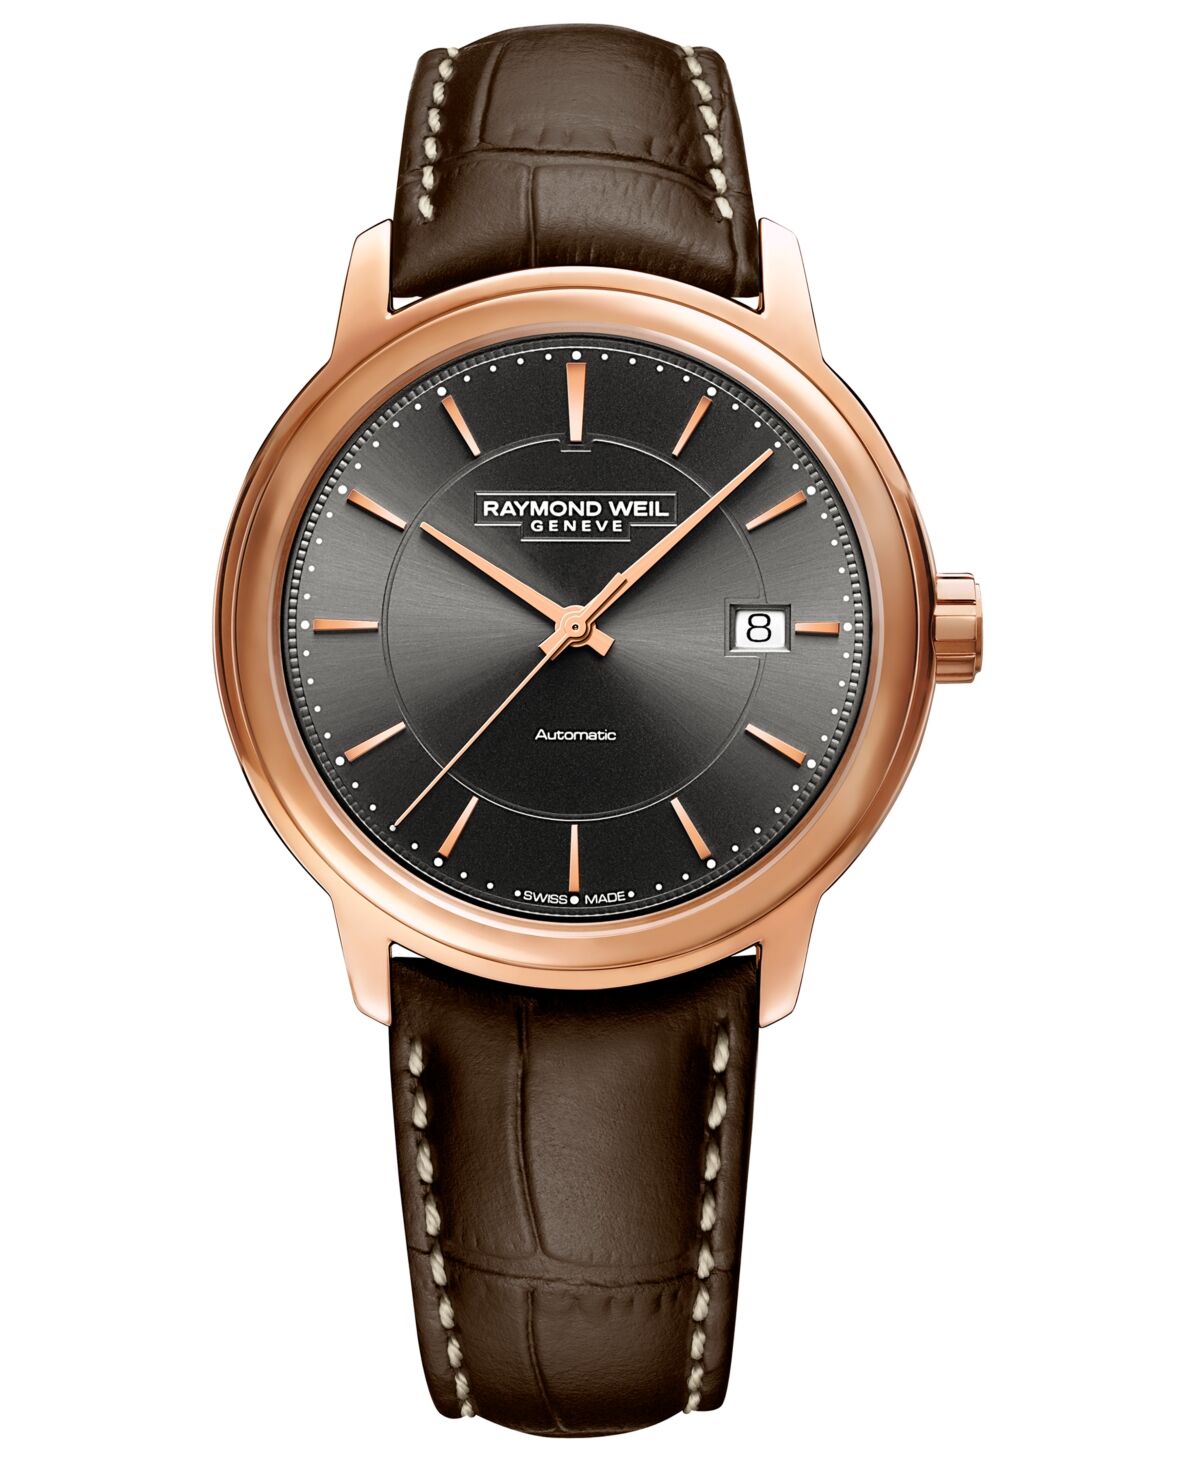 Raymond Weil Men's Swiss Automatic Maestro Brown Leather Strap Watch 40mm - Brown